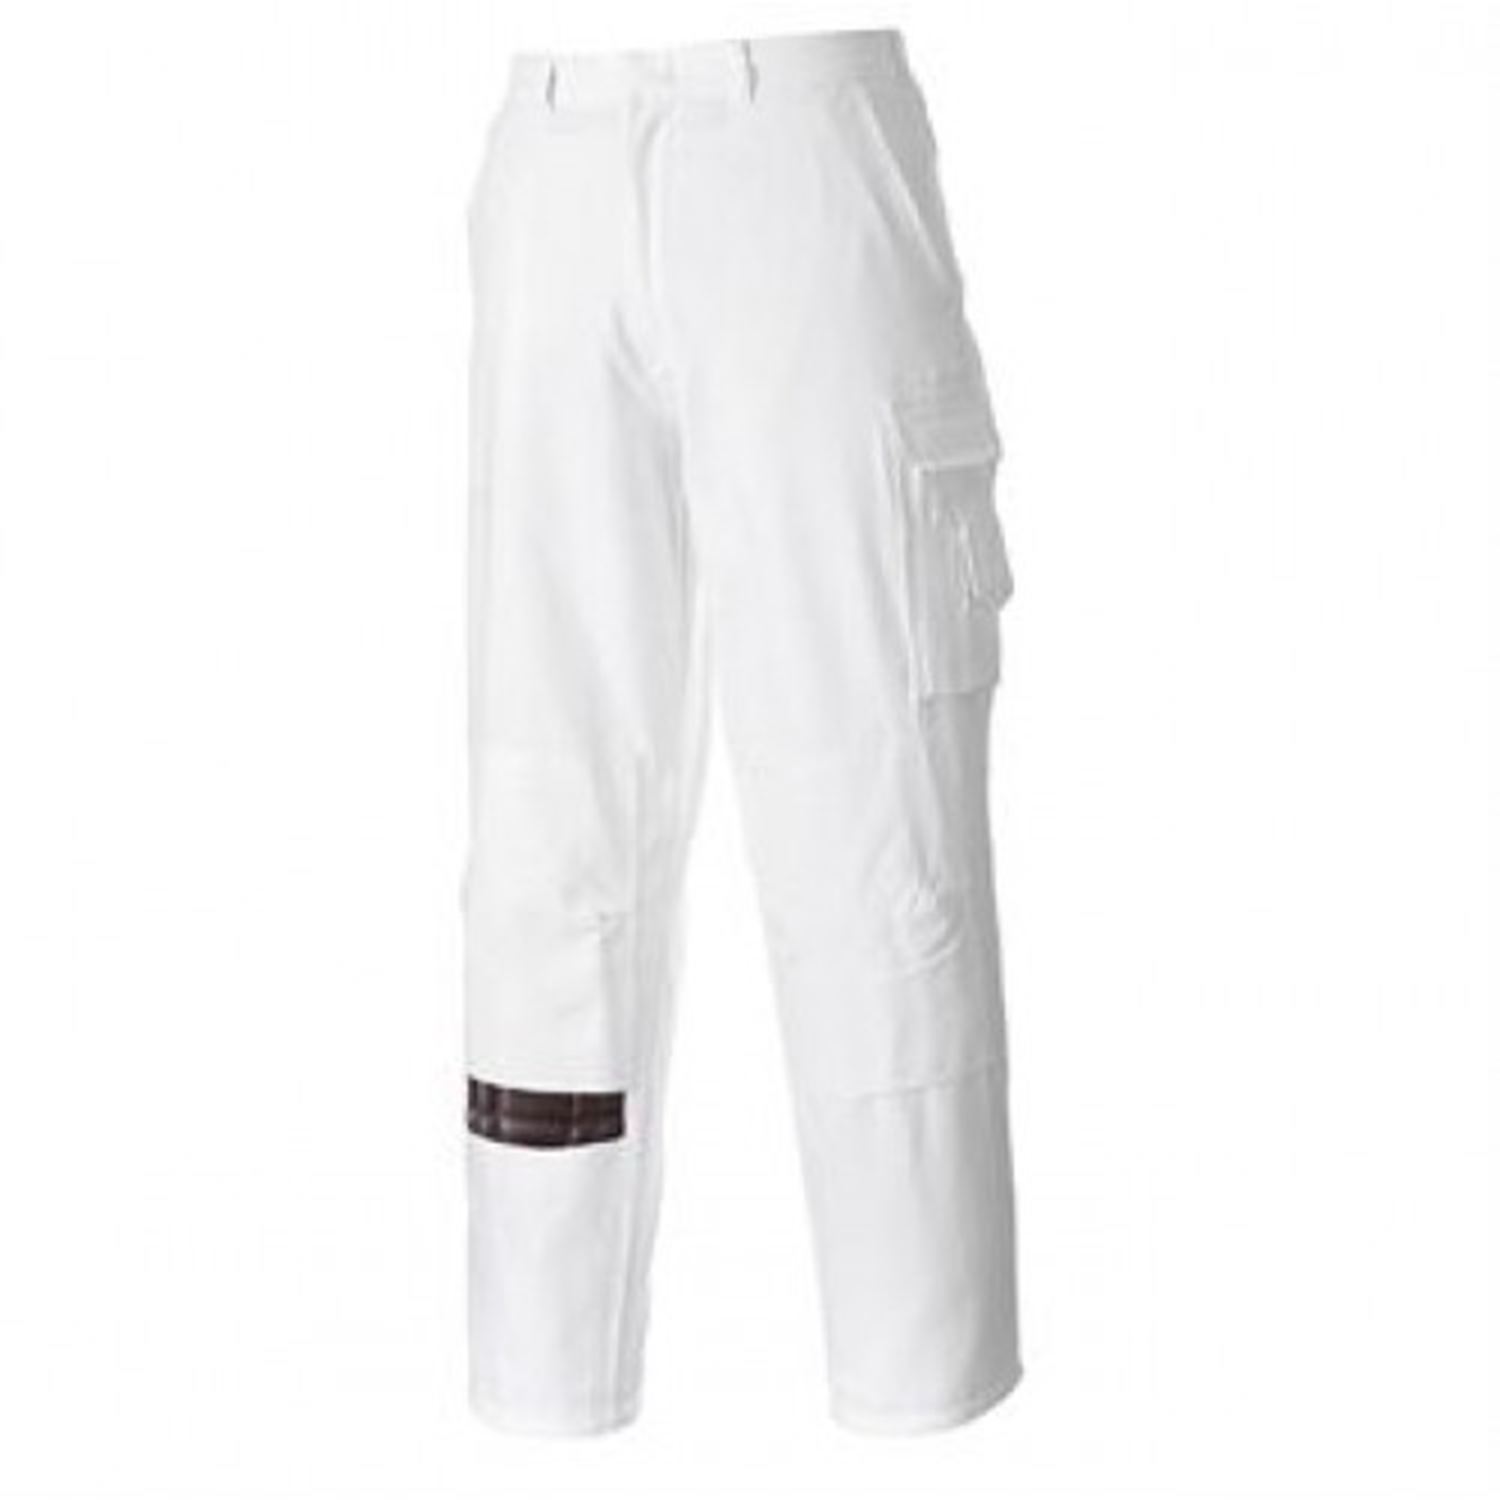 46 32 Regular Dassy Seattle Work Trousers White Grey Painters on OnBuy